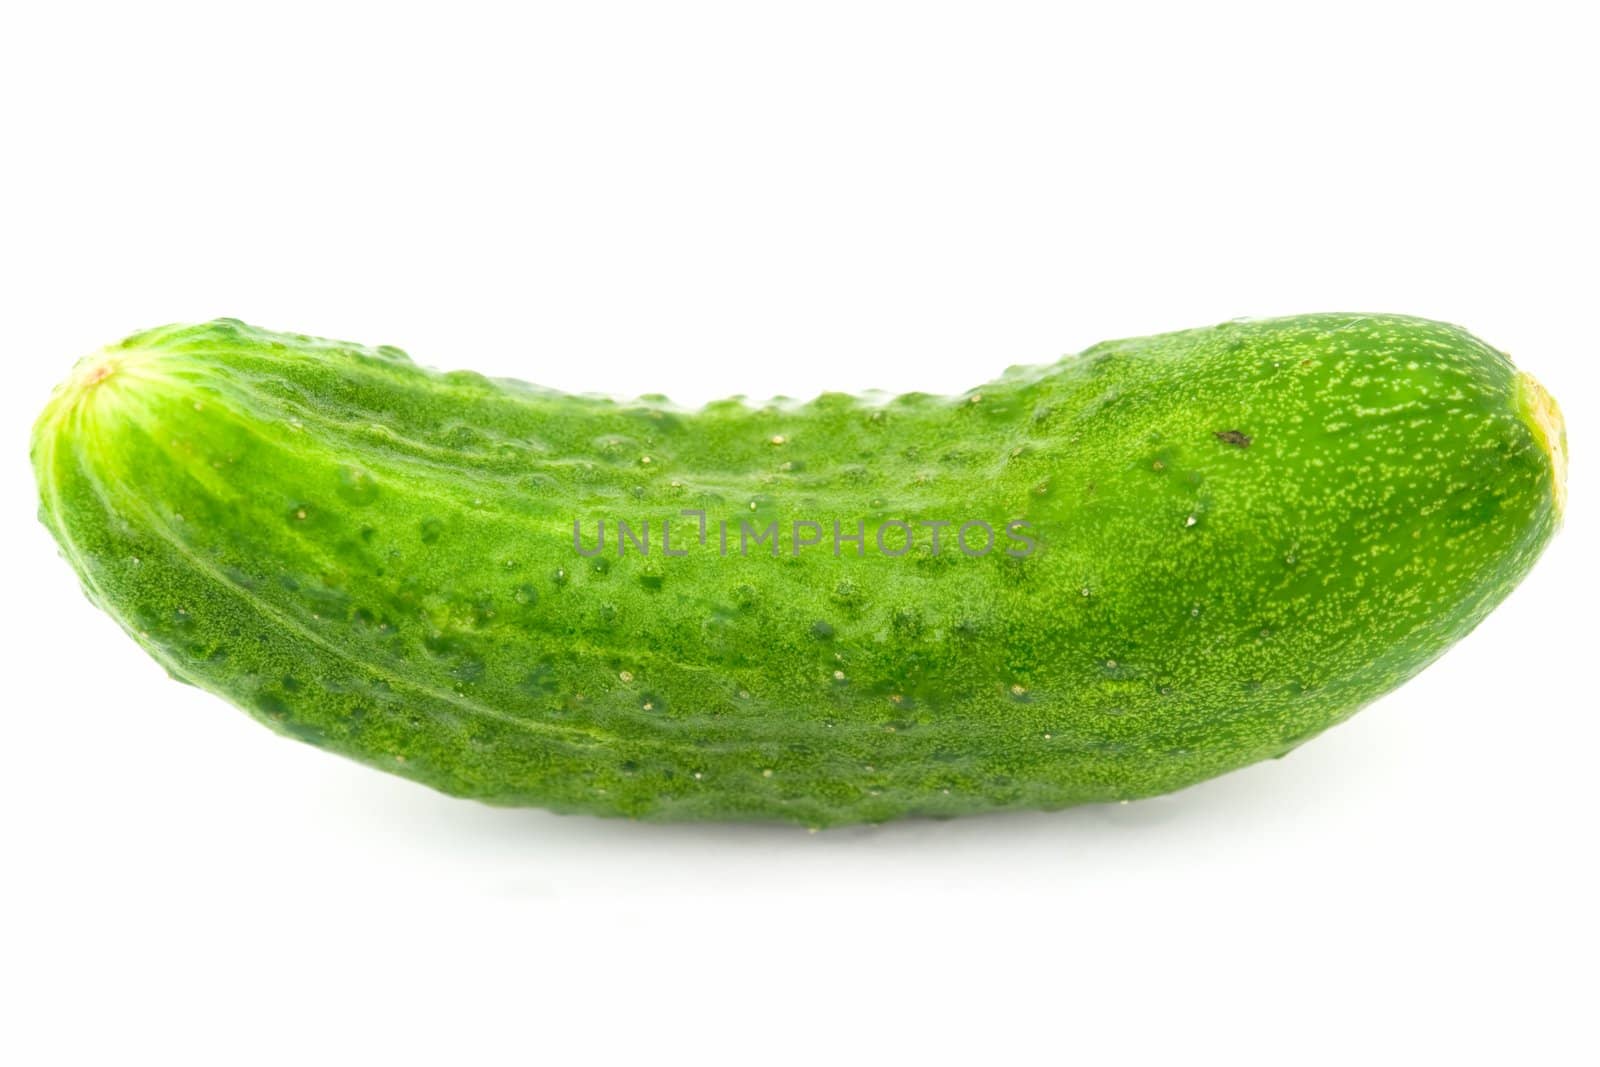 One green cucumber on a white background.